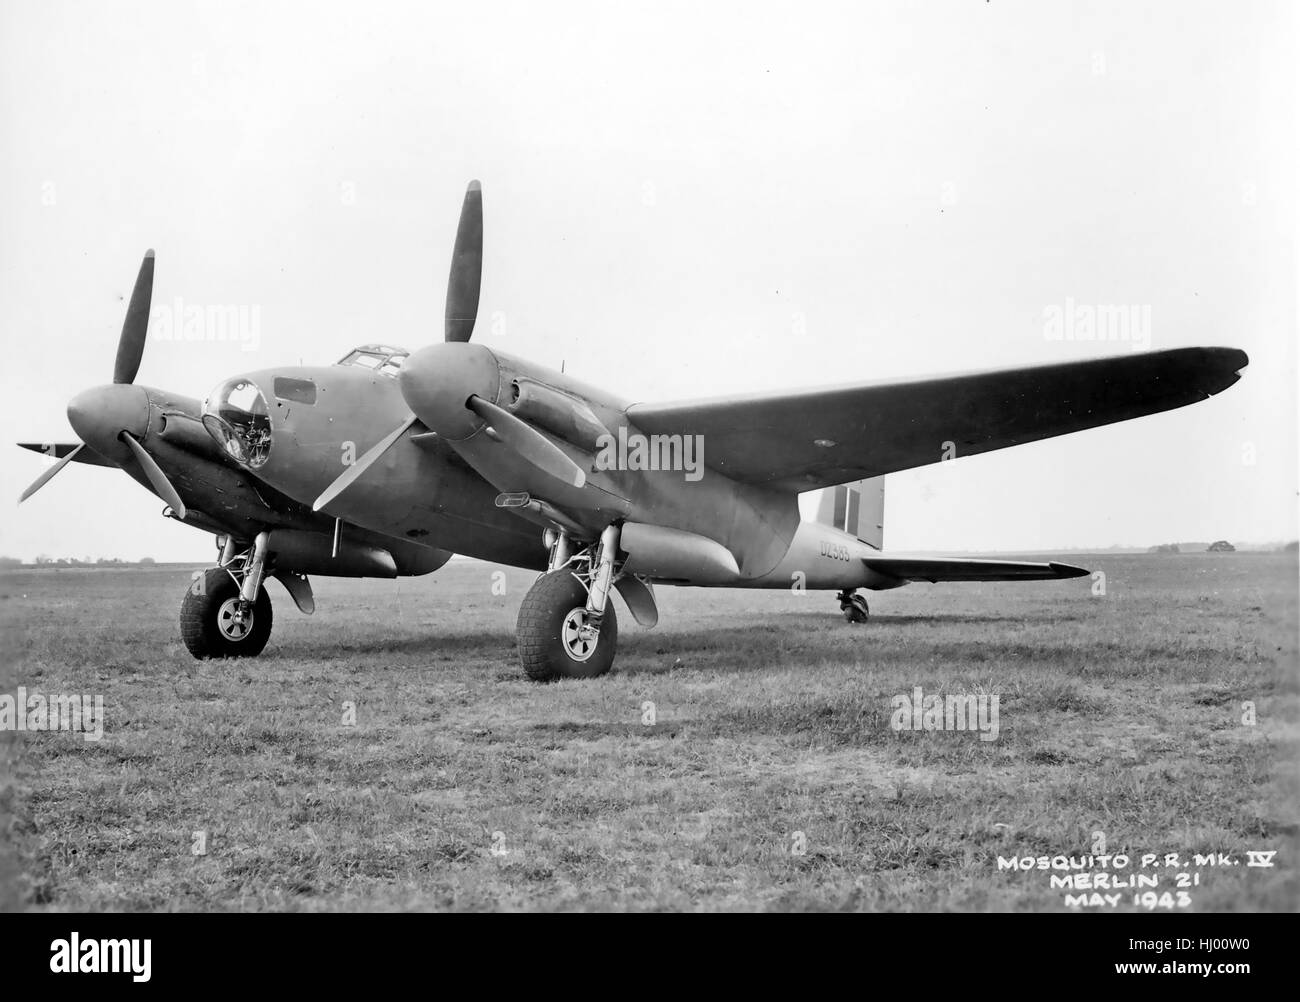 de HAVILLAND MOSQUITO P.R. Mk IV with Rolls Royce Merlin 21 engine in May 1943.  Flown by 540 Squadron RAF this aircraft  was hit  during the attack on the Gestapo HQ in Copenhagen on 21 March 1945 but landed safely back at RAF Rackheath. Stock Photo